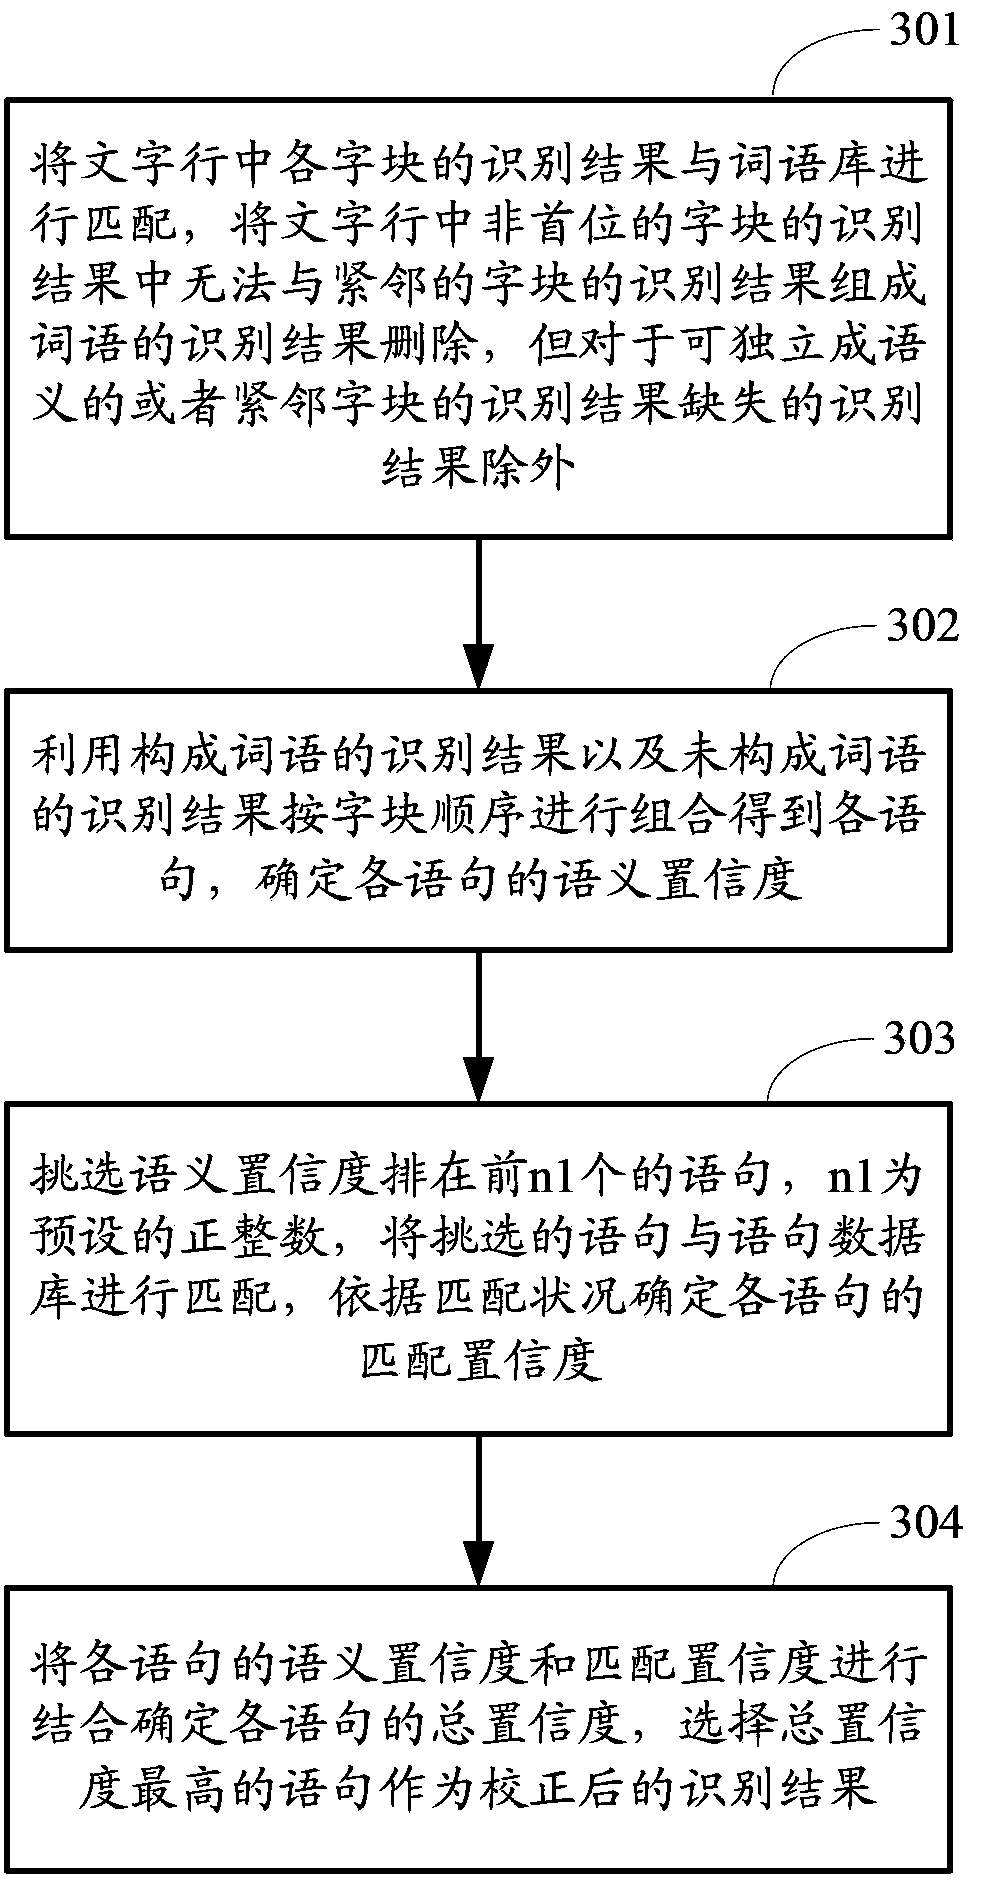 Method and device for recognizing image characters